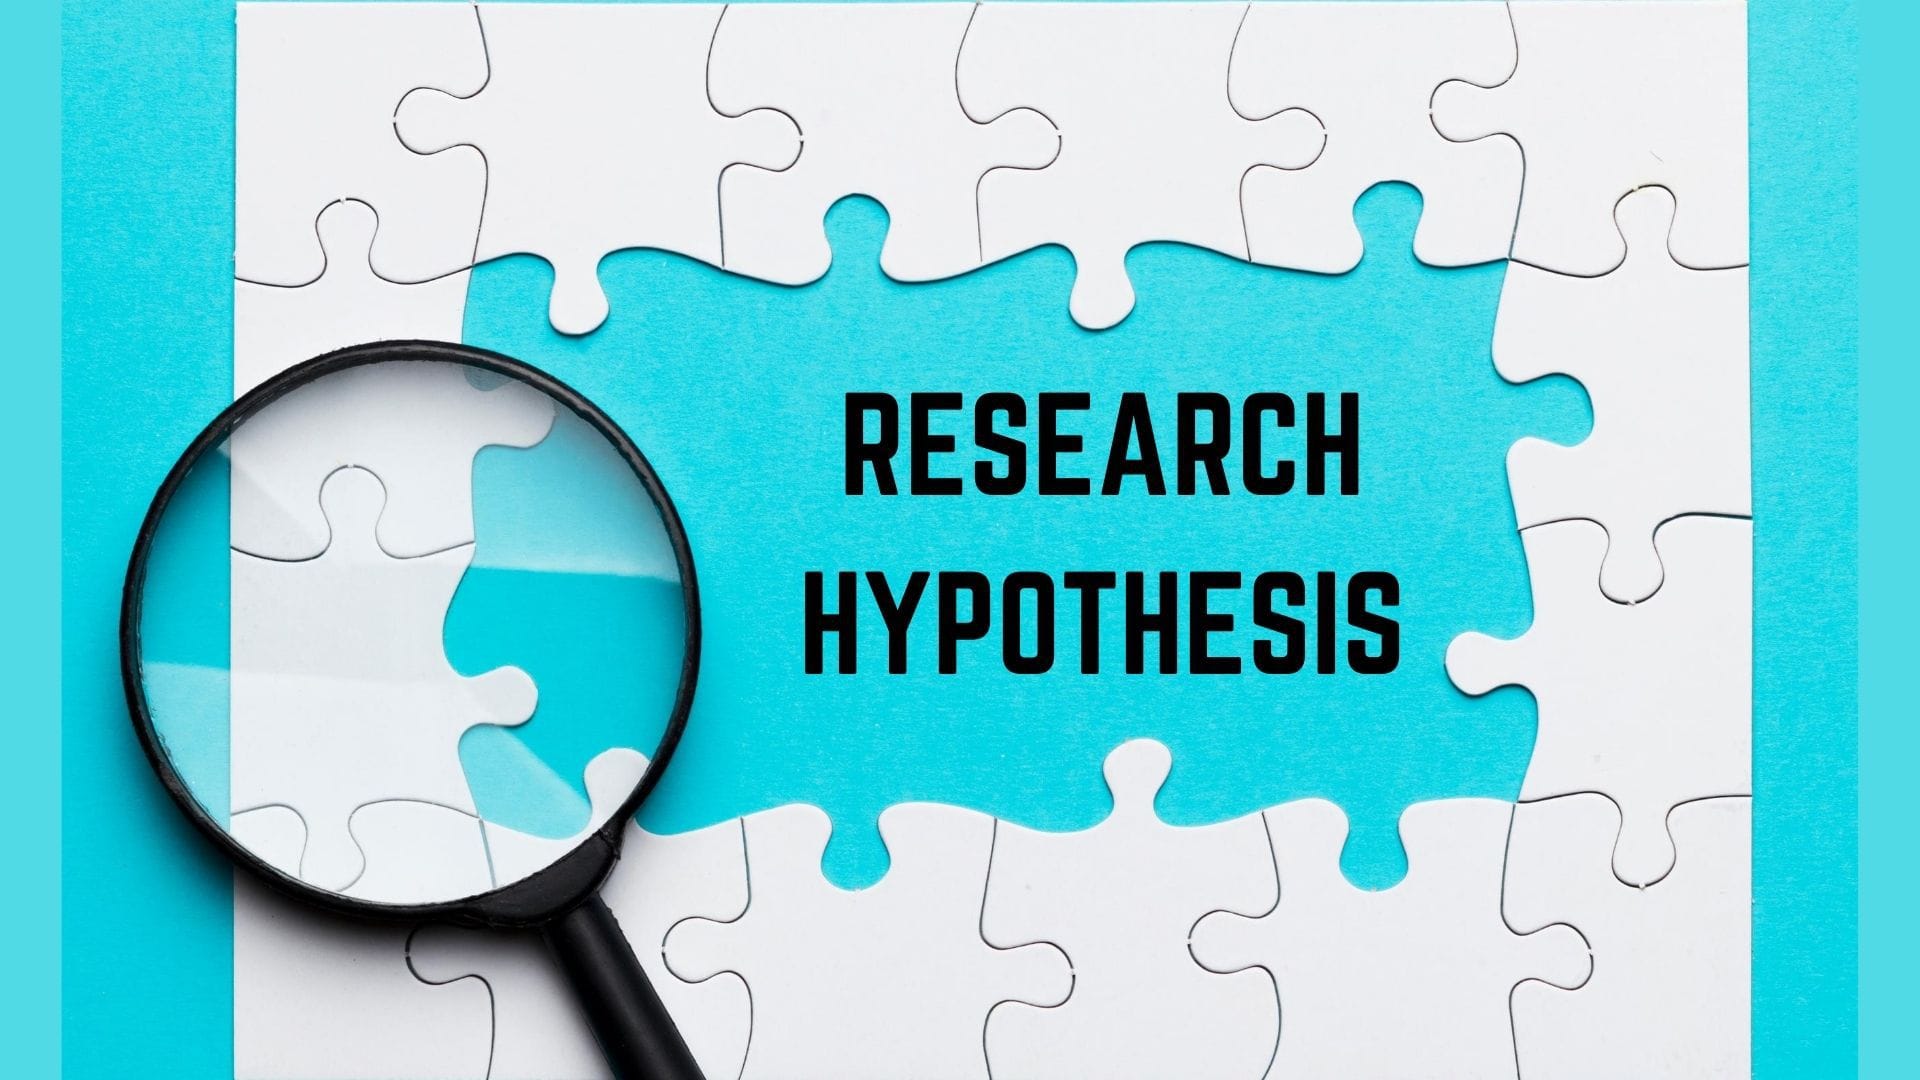 what are the hypothesis of research